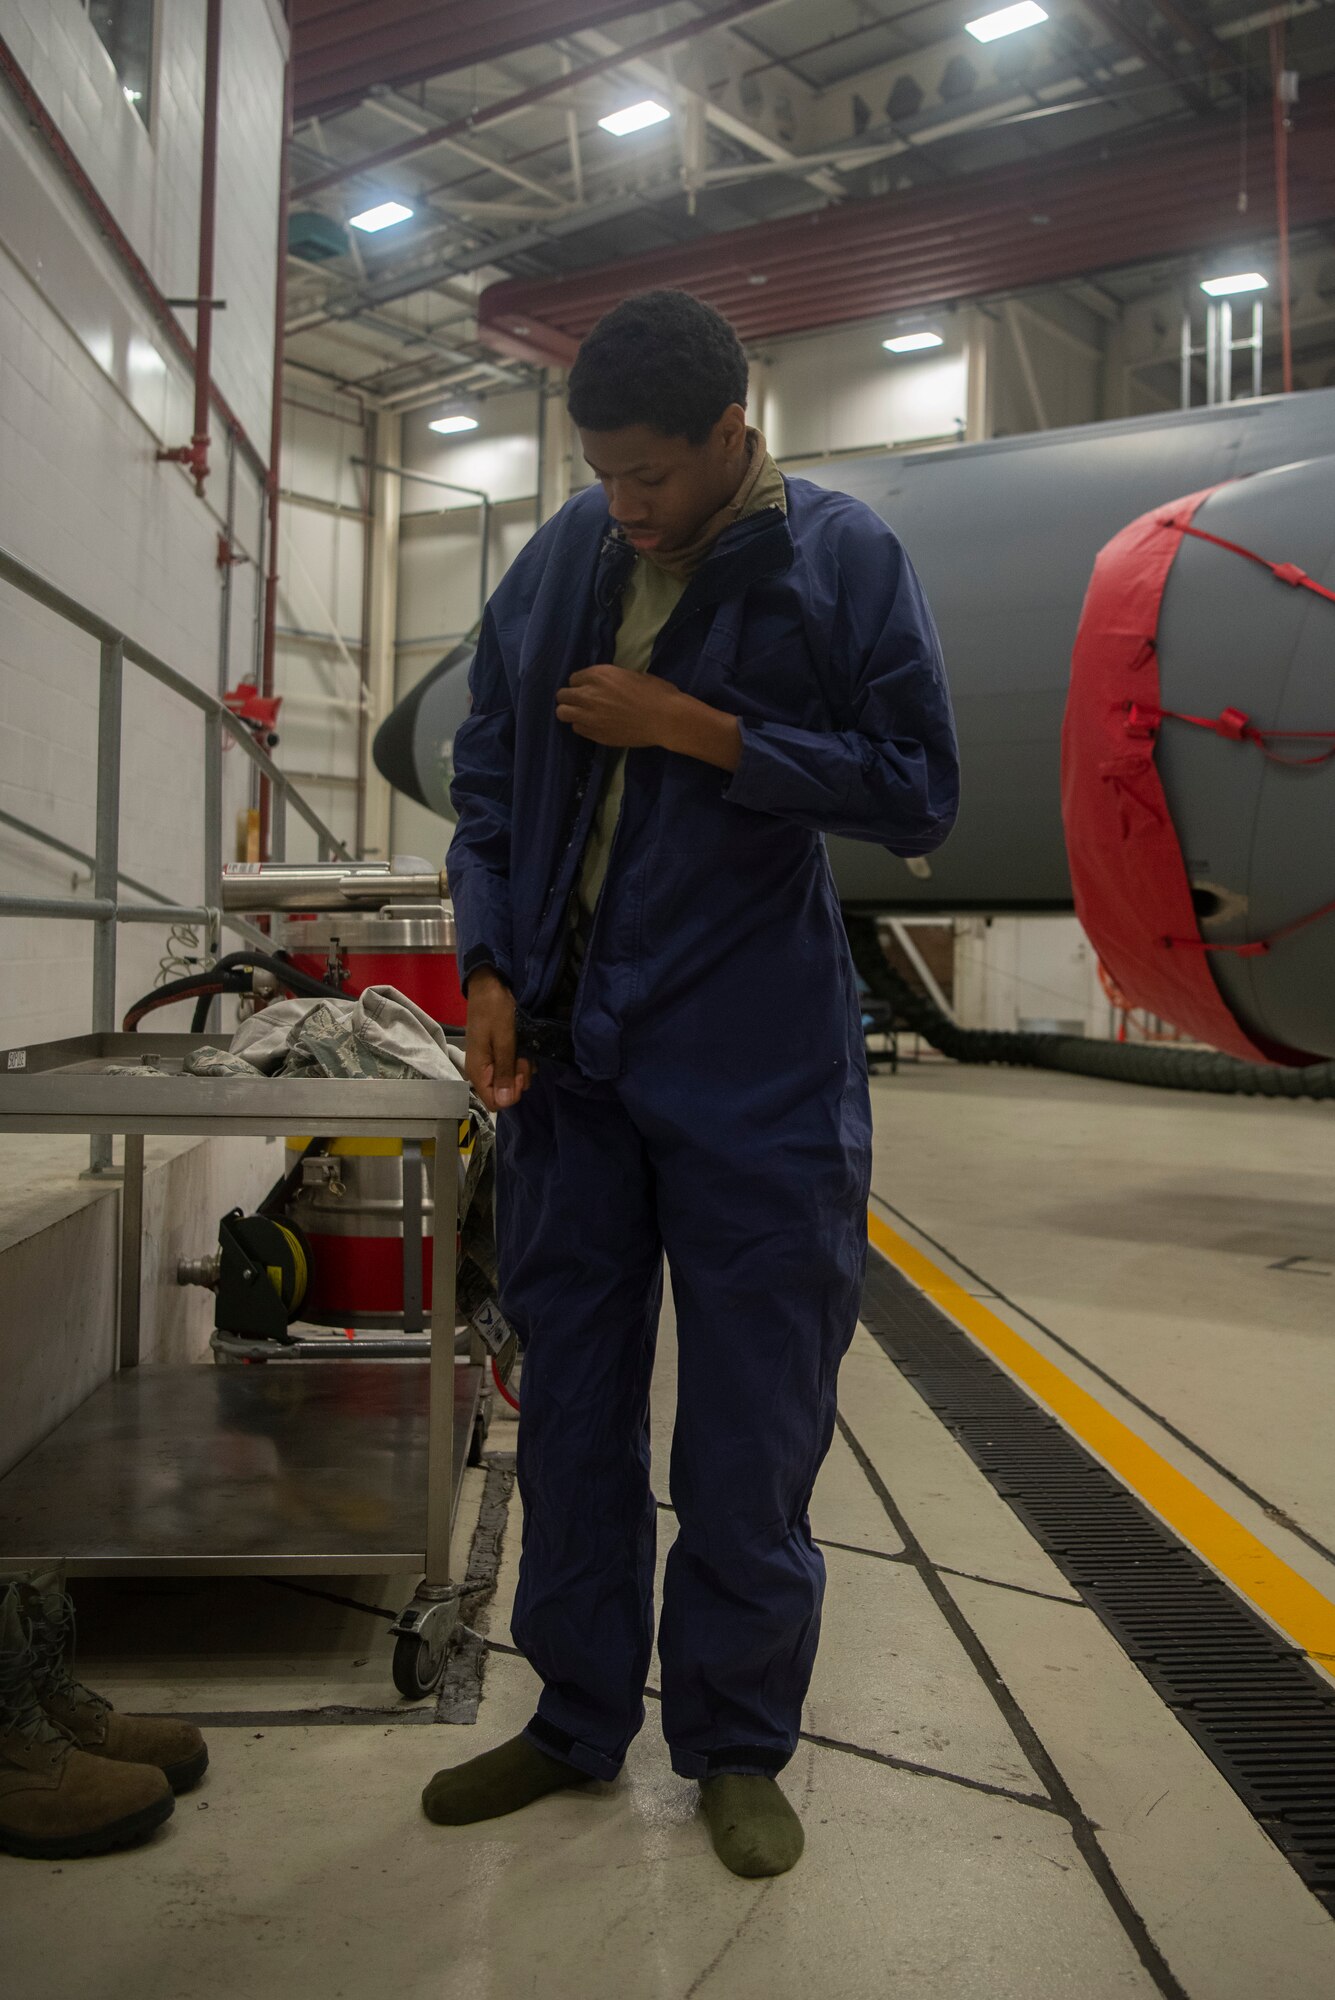 Airman 1st Class Dezmond Ross, 100th Maintenance Squadron fuel systems repair apprentice, puts on his static-resistant suit at RAF Mildenhall, England, May 27, 2020. The suit is worn inside fuel cells to protect Airmen from hazardous materials and to limit the creation of static electricity in an environment containing fuel vapor. (U.S. Air Force photo by Airman 1st Class Joseph Barron)